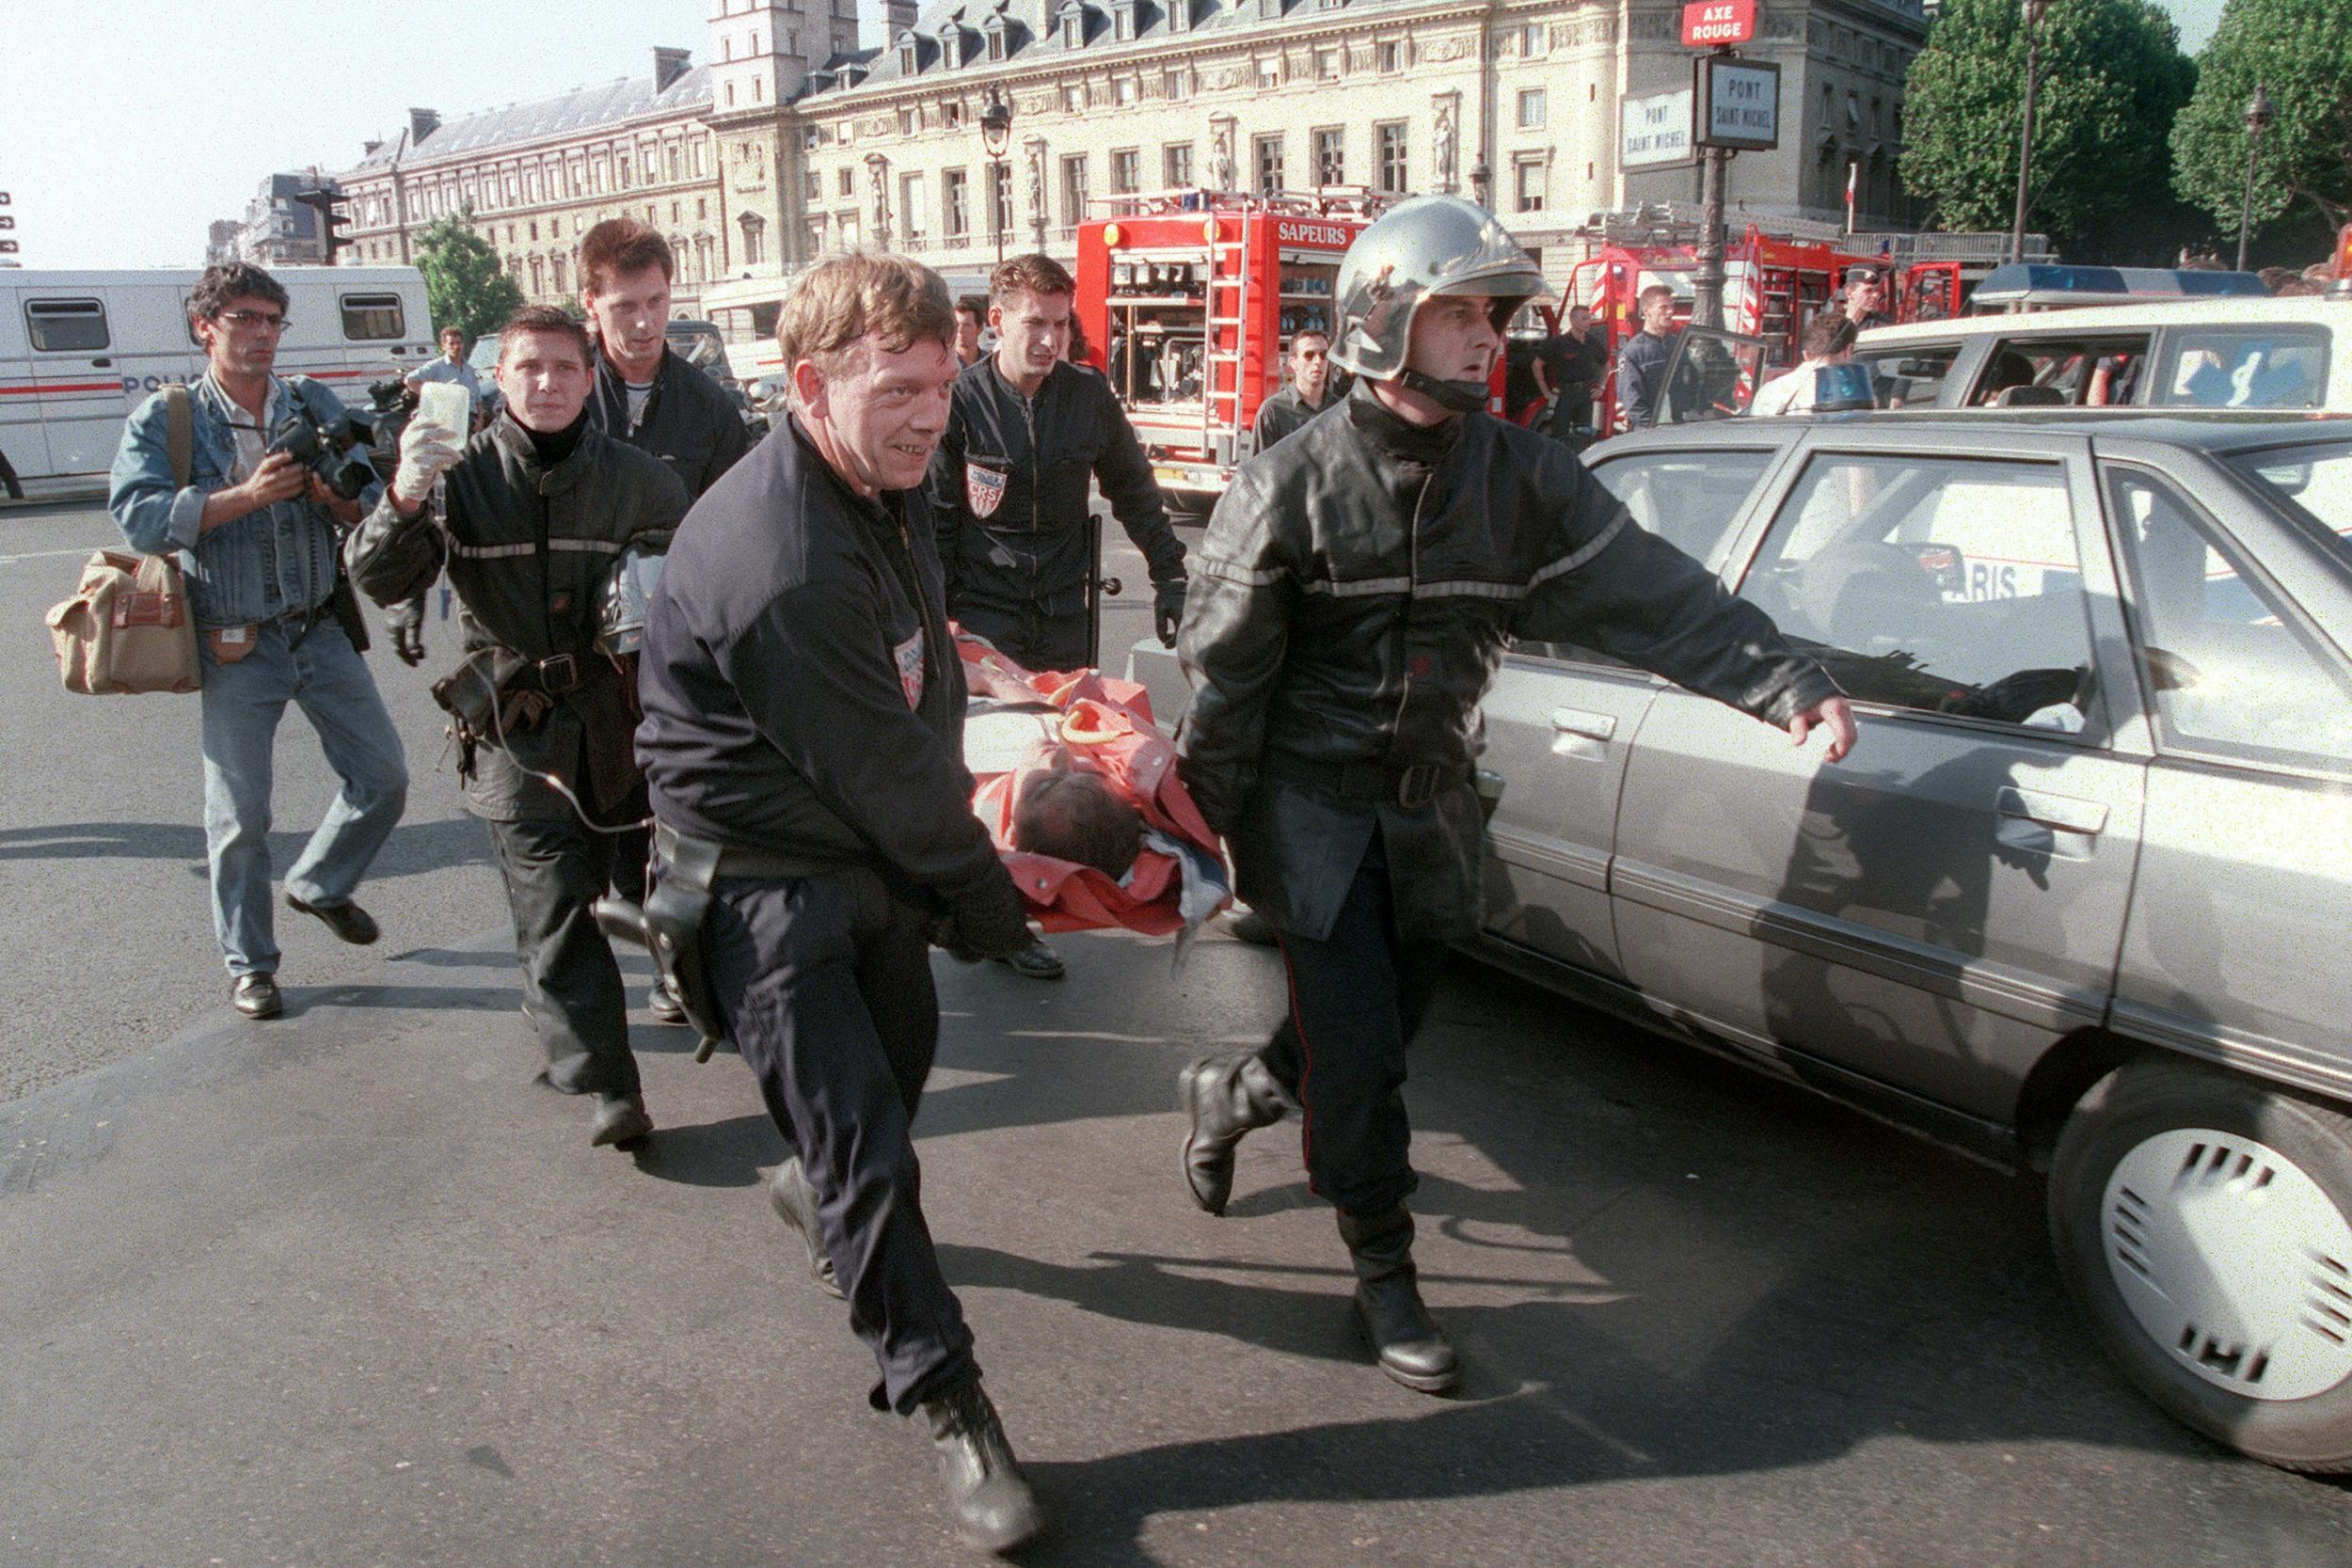 Firemen carry a victim of an Islamist bombing at Saint-Michel station in Paris in 1995 AFP/Getty